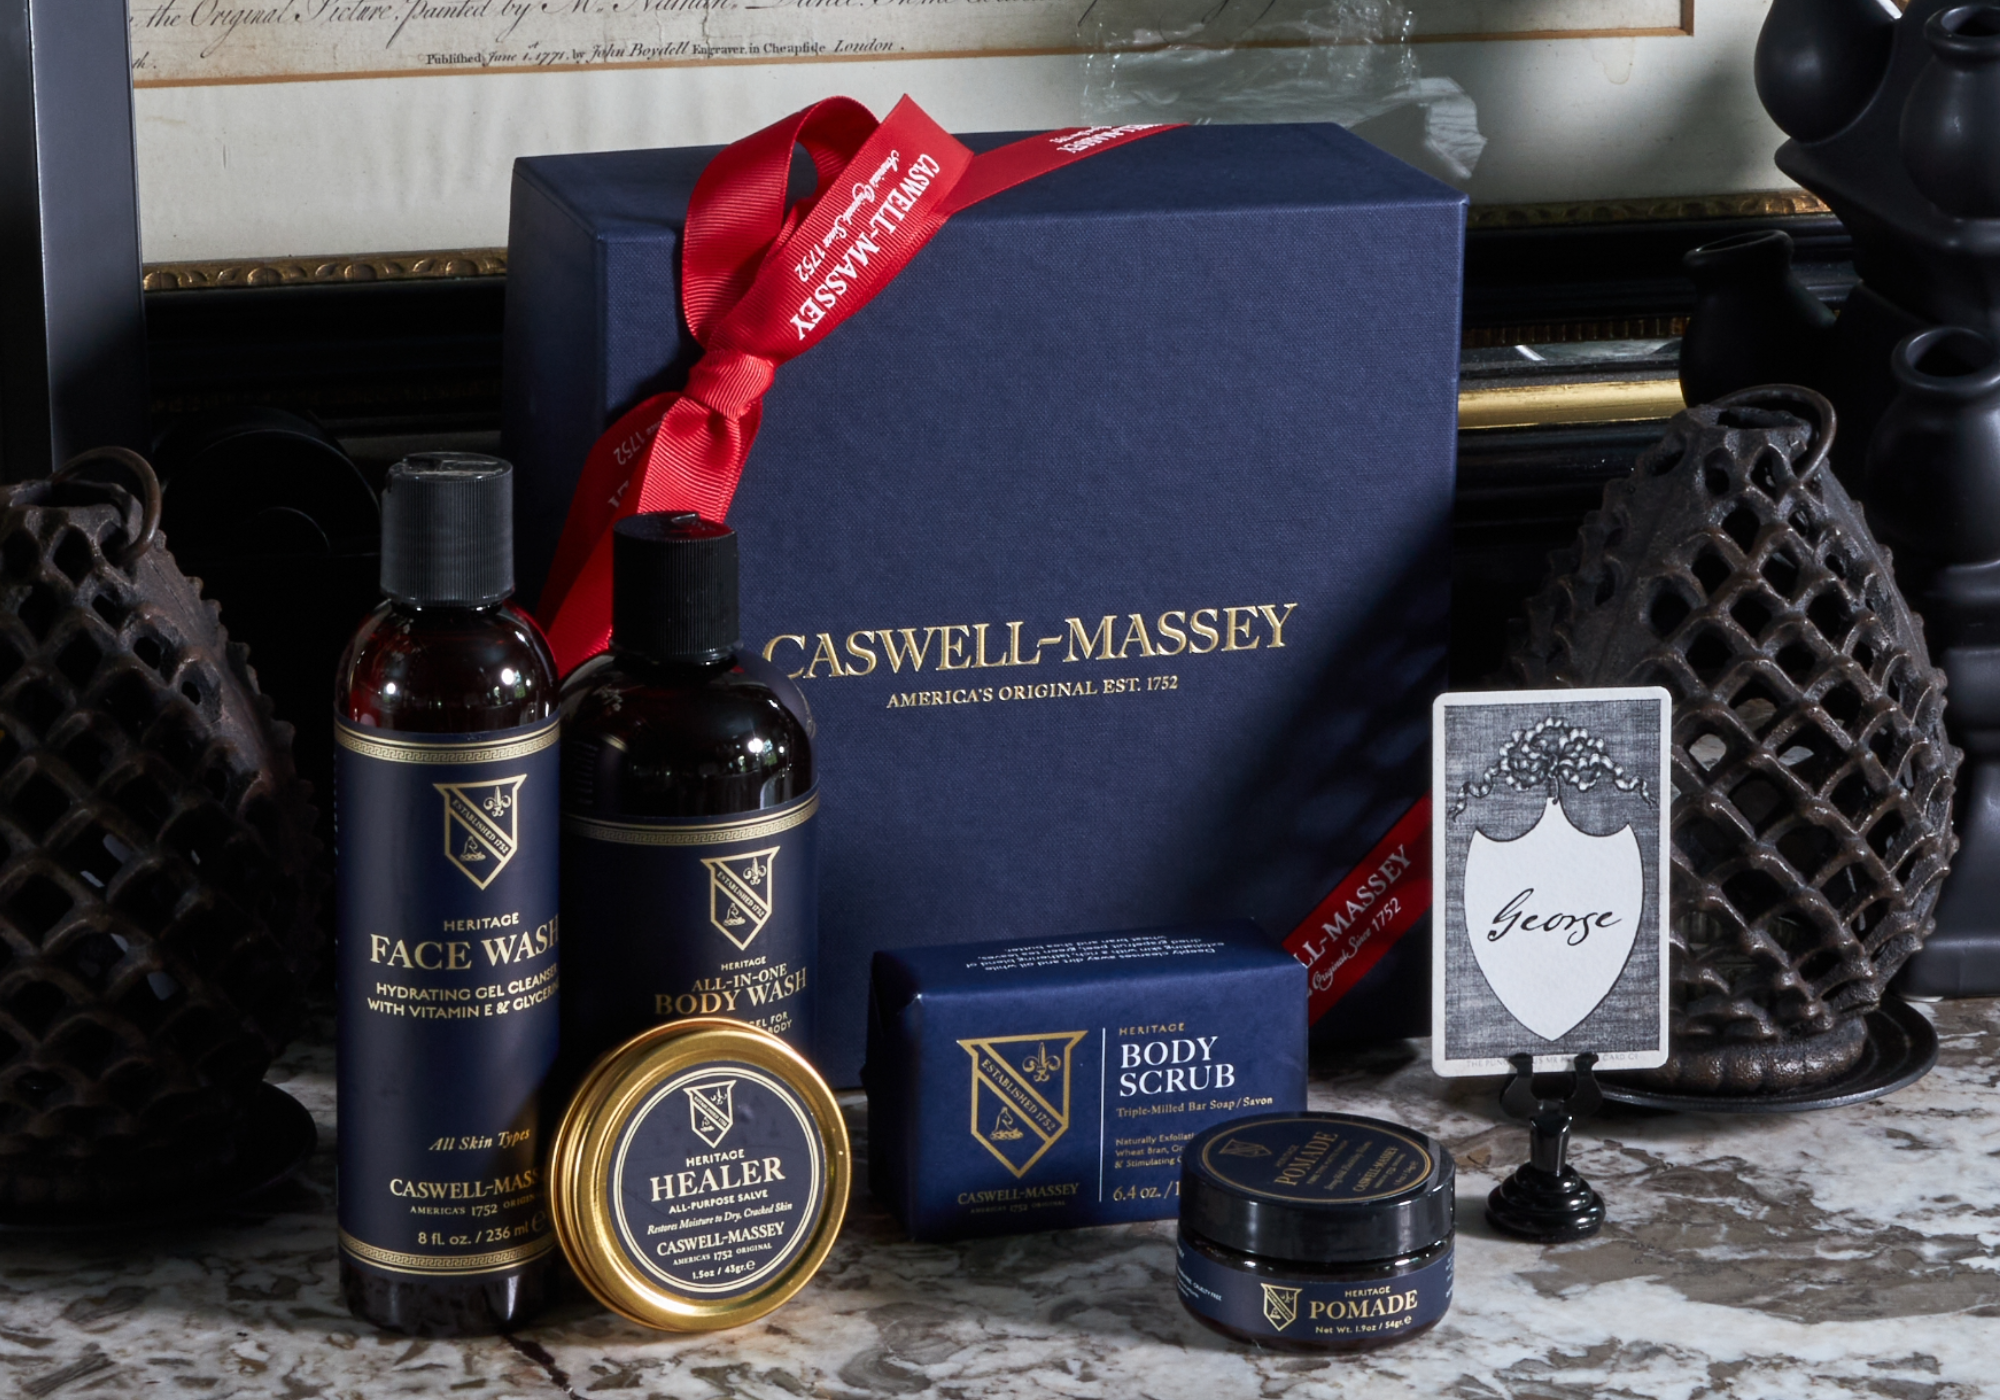 Caswell-Massey: Premium Heritage Grooming Kit for Men, Including Face Wash, All-in-One Body Wash, Hand Healer, Body Scrub Bar Soap, and Hair Pomade